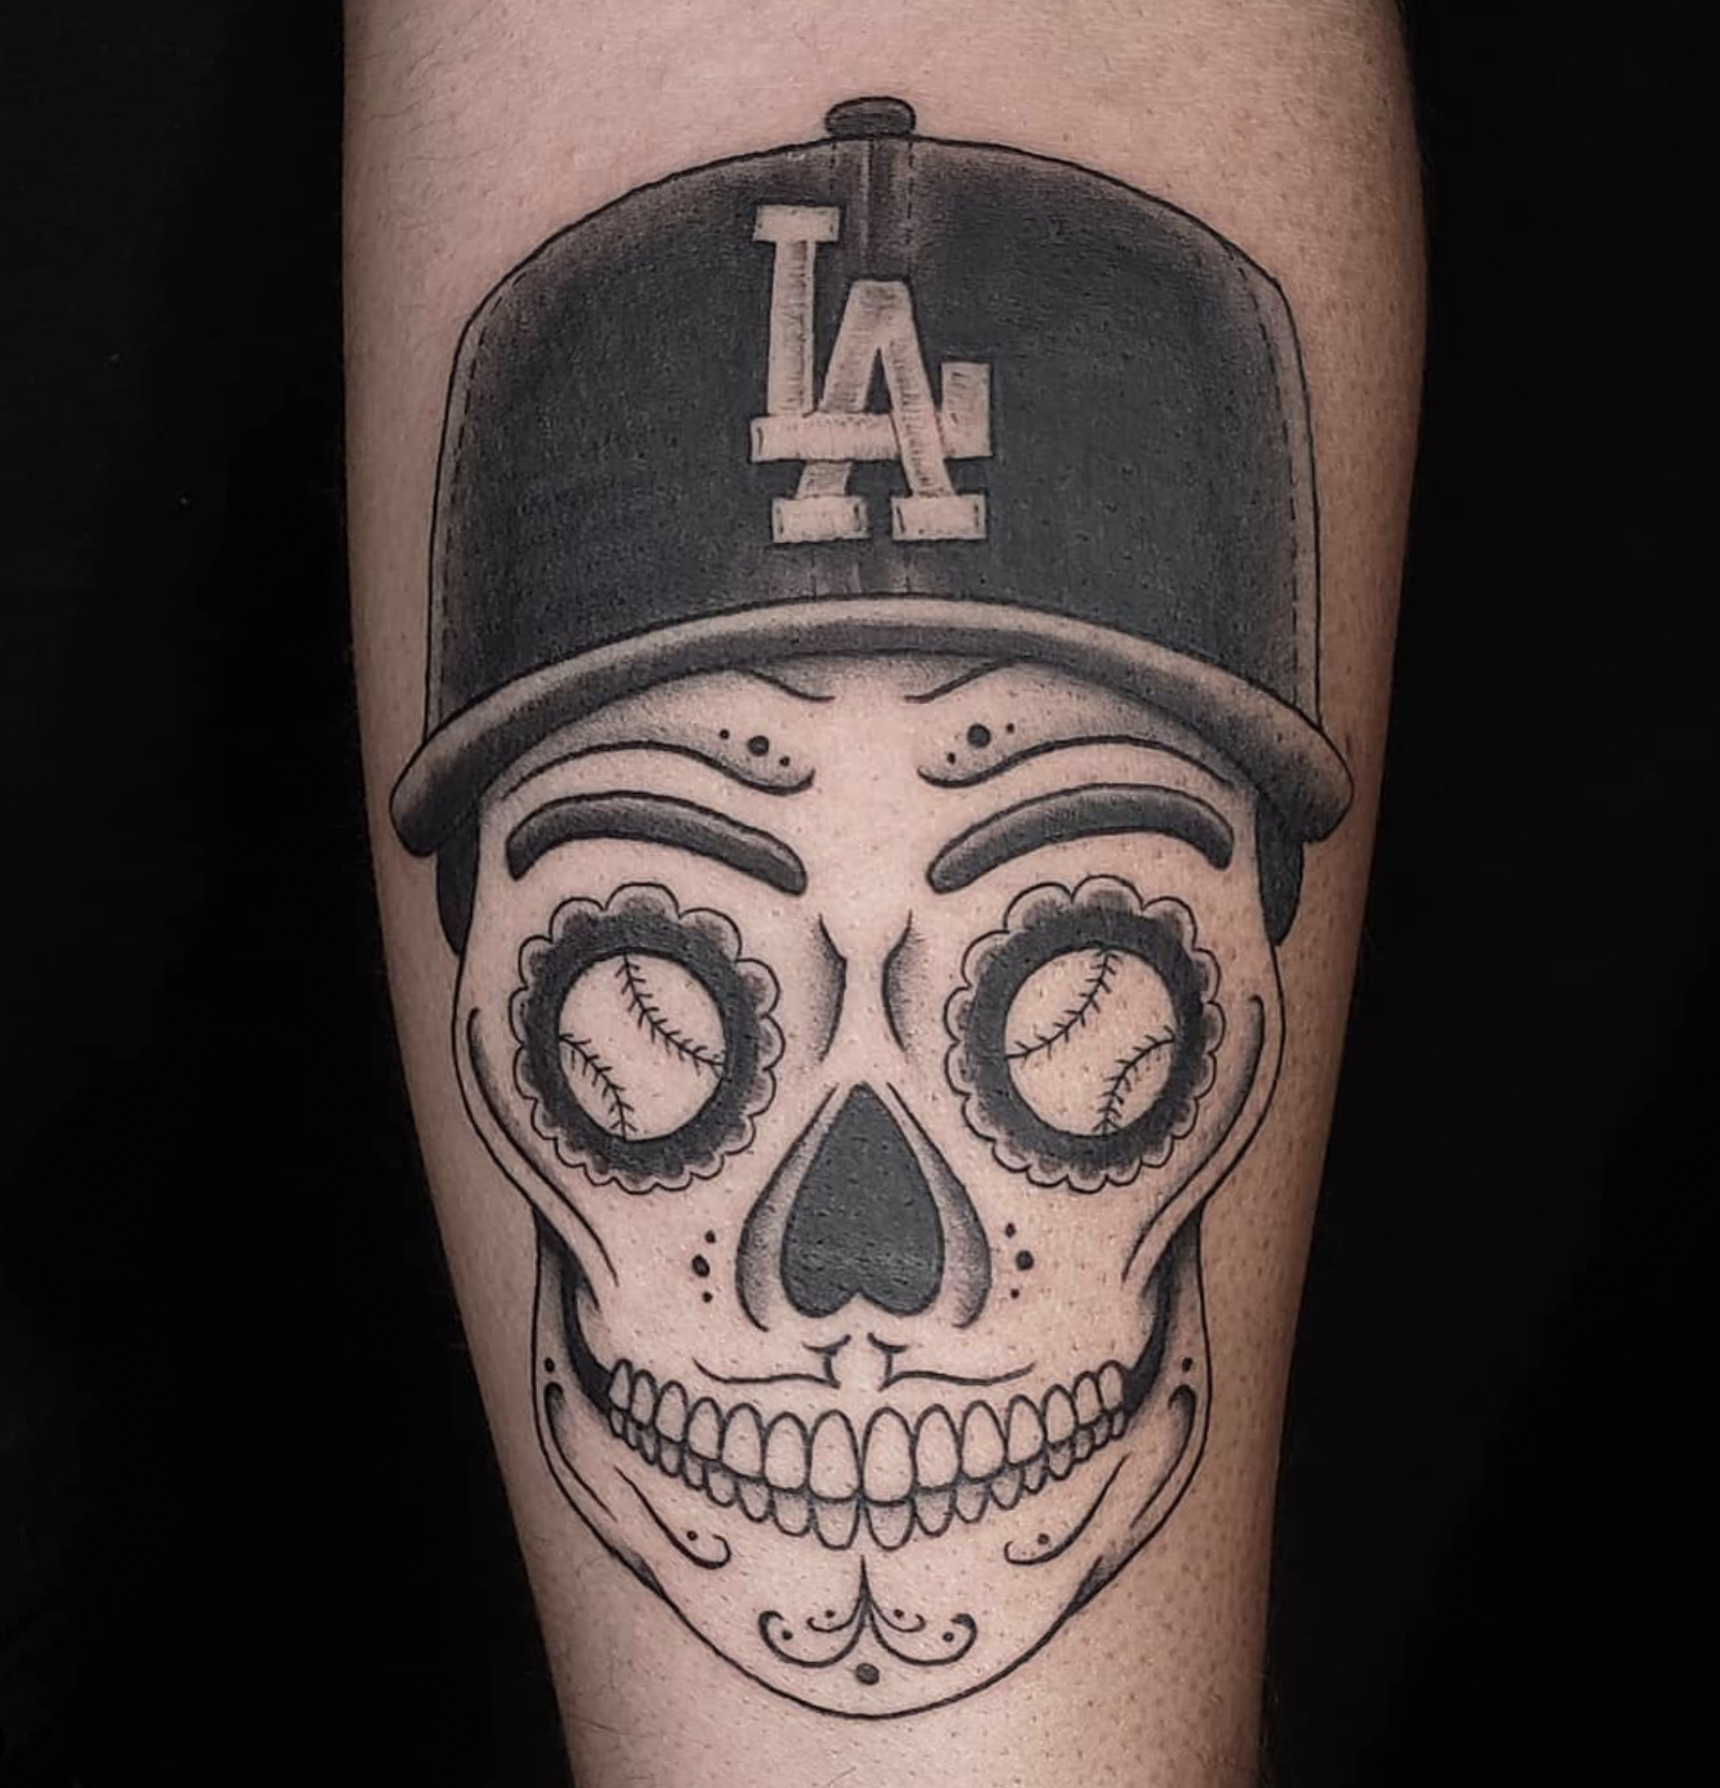 Sports Tattoos — Go For The Game